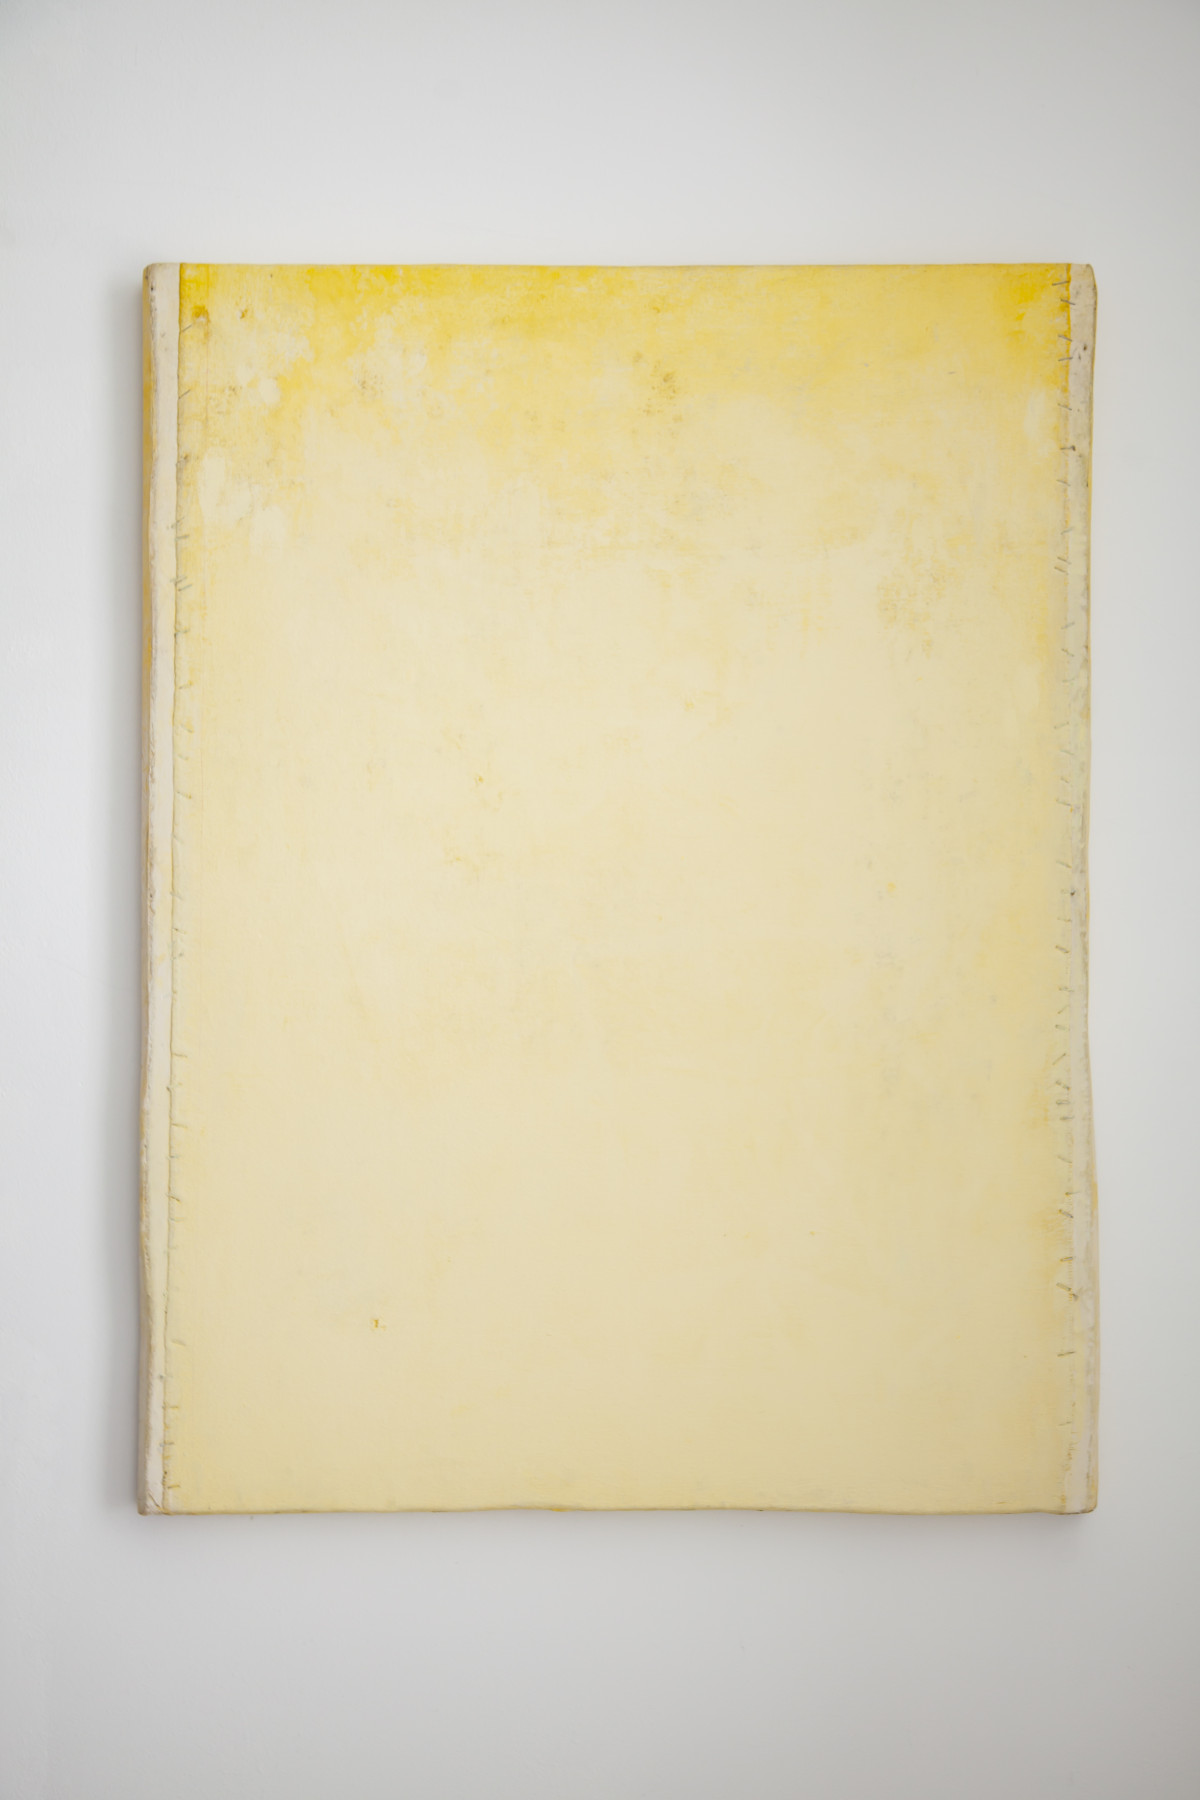 Lawrence Carroll, ‘Untitled (Yellow Painting)’, 2012-2015